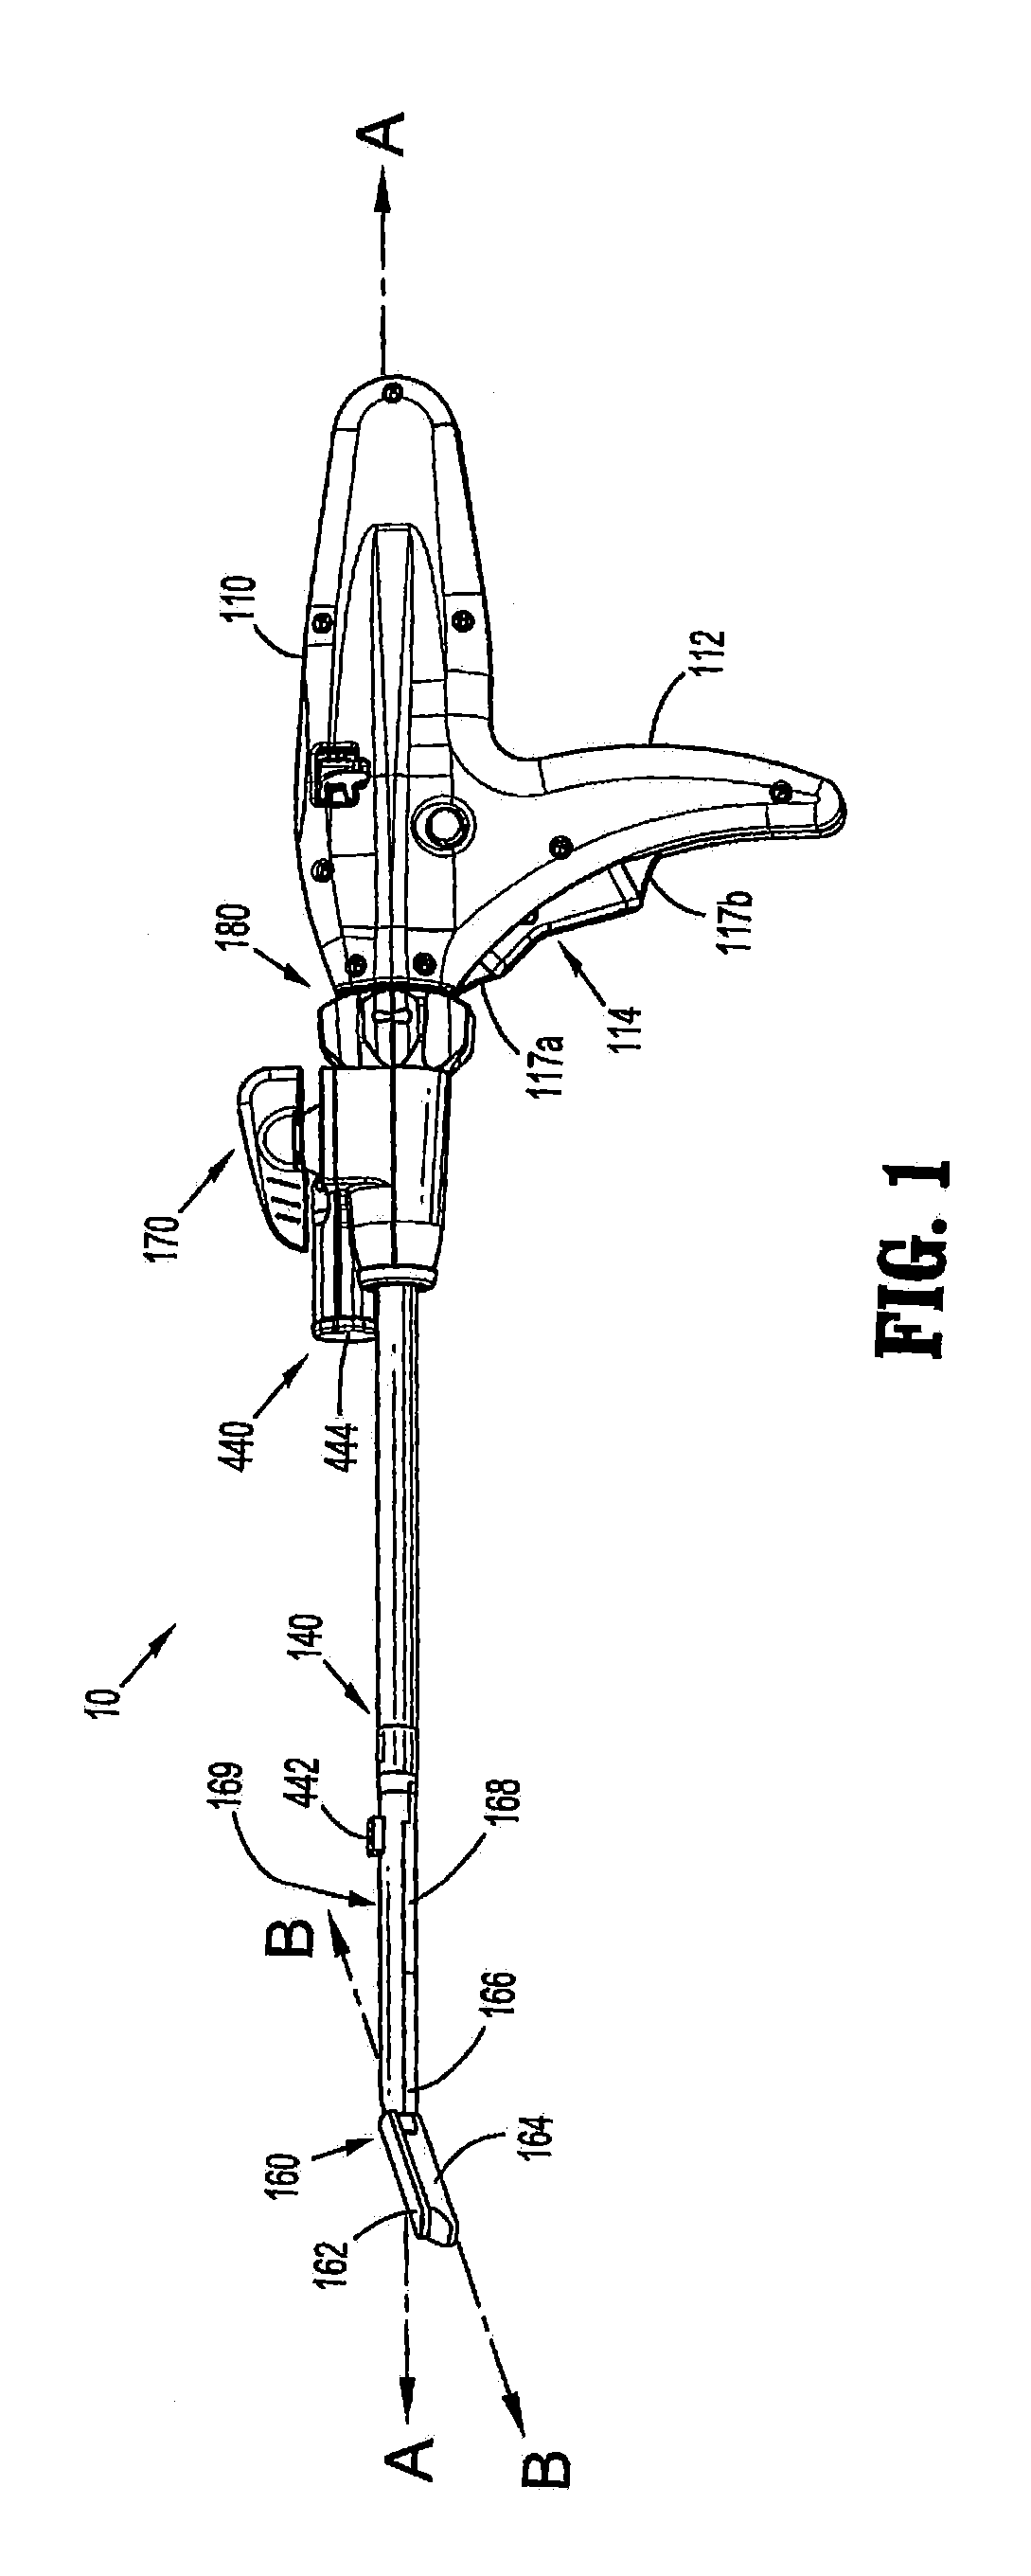 Powered surgical stapling device